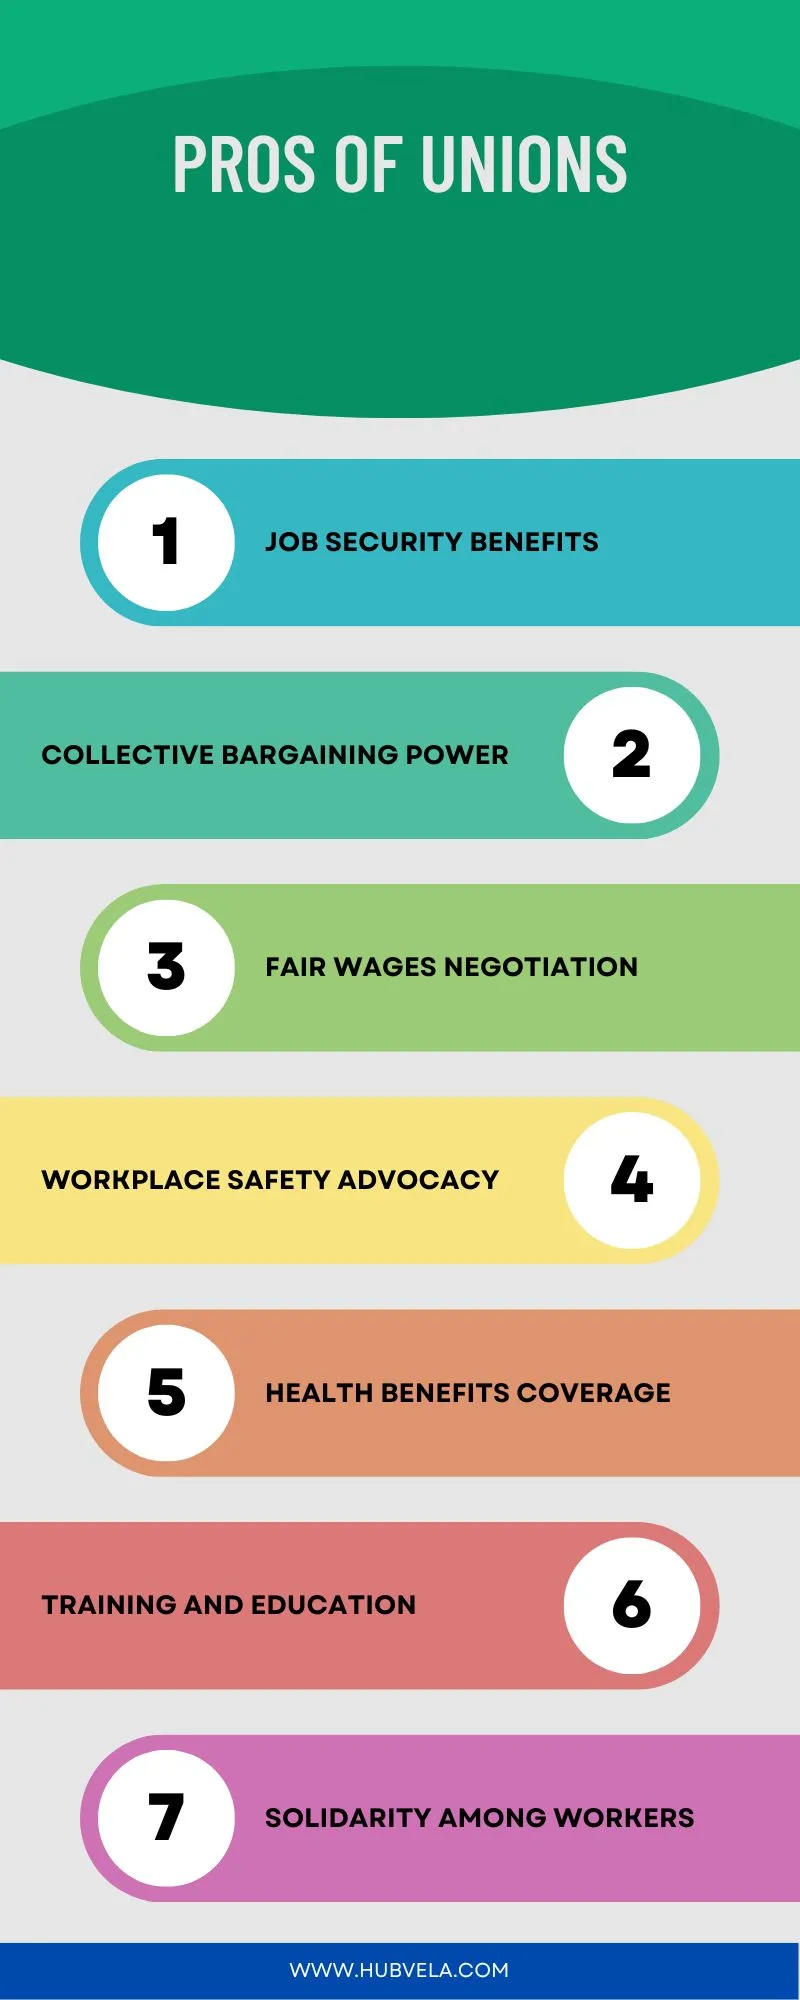 Pros of Unions Infographic